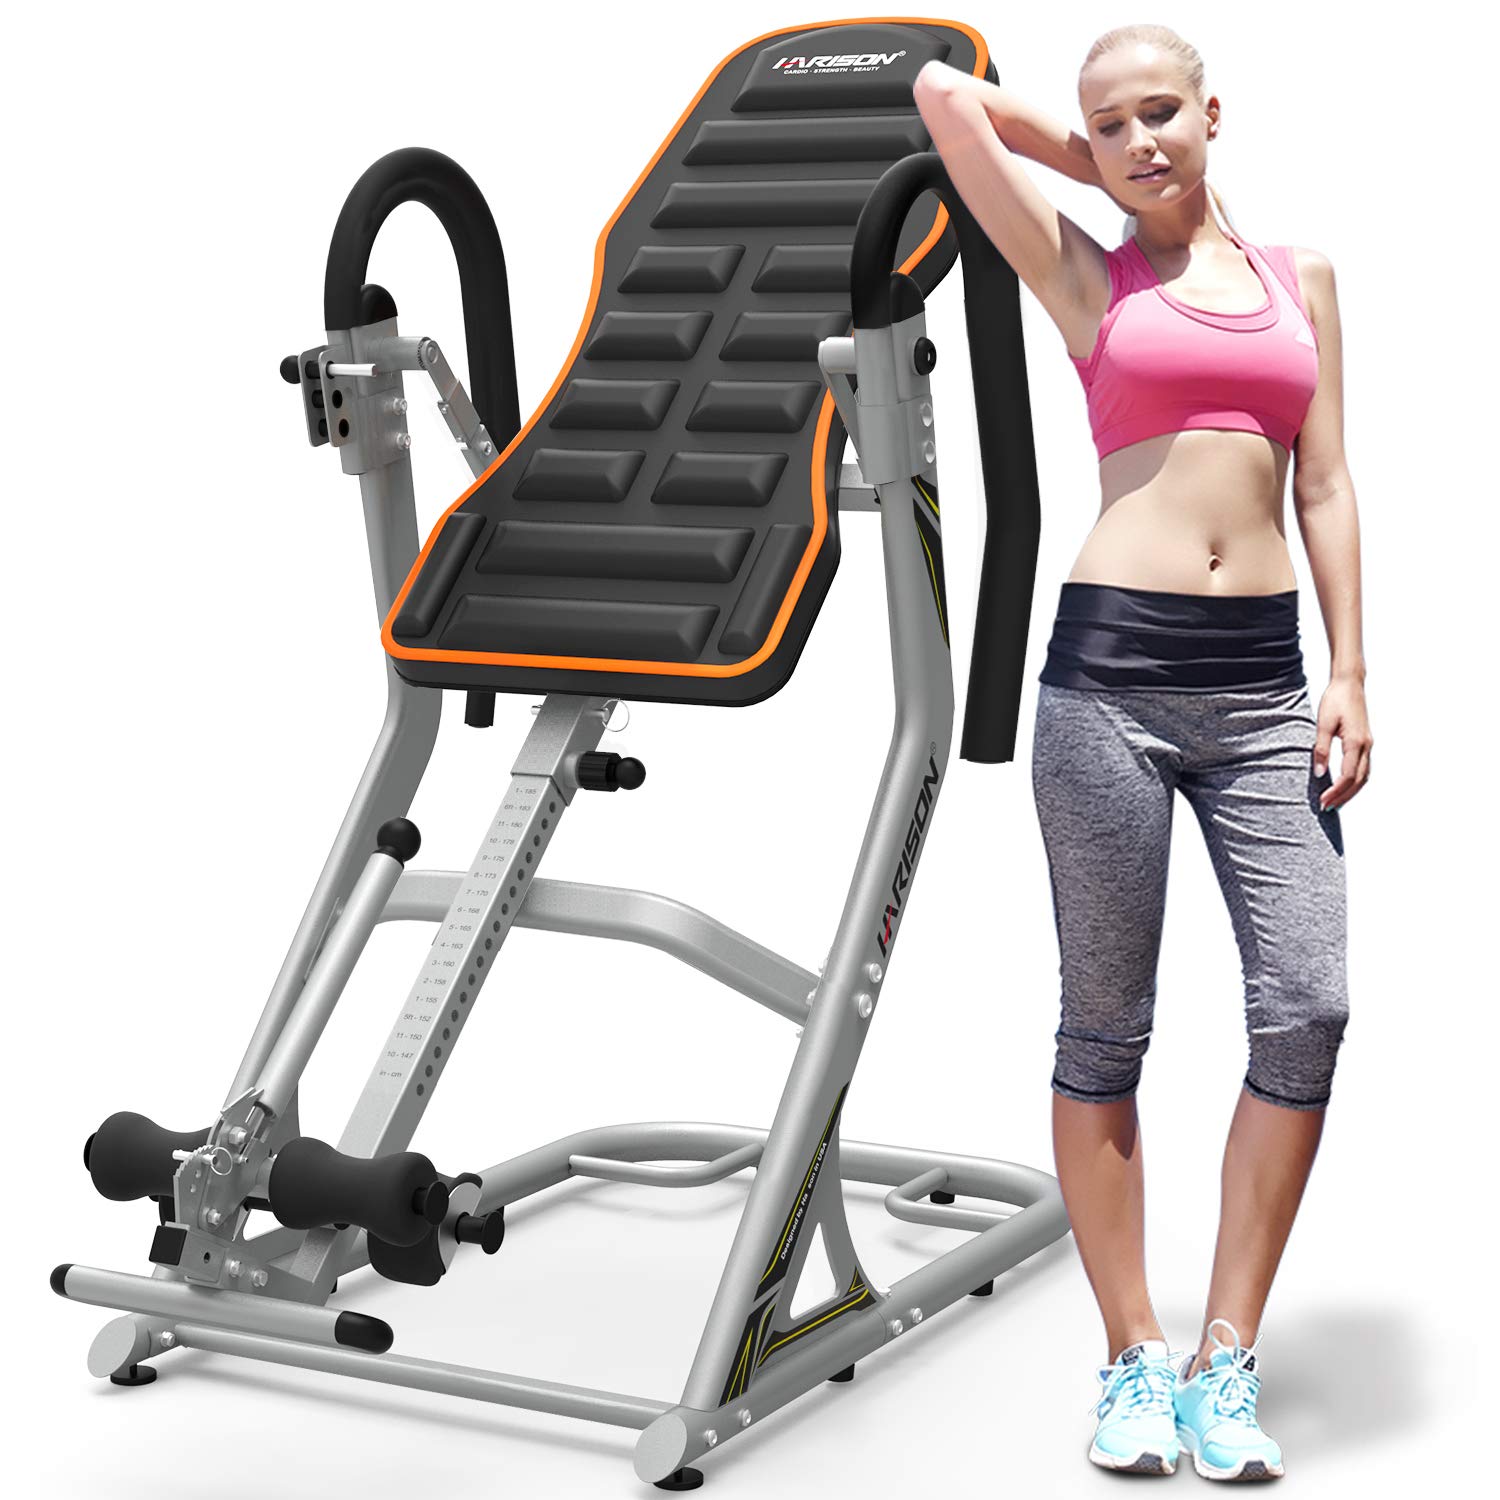 50 Best Inversion table hurt my lower back for Workout at Home